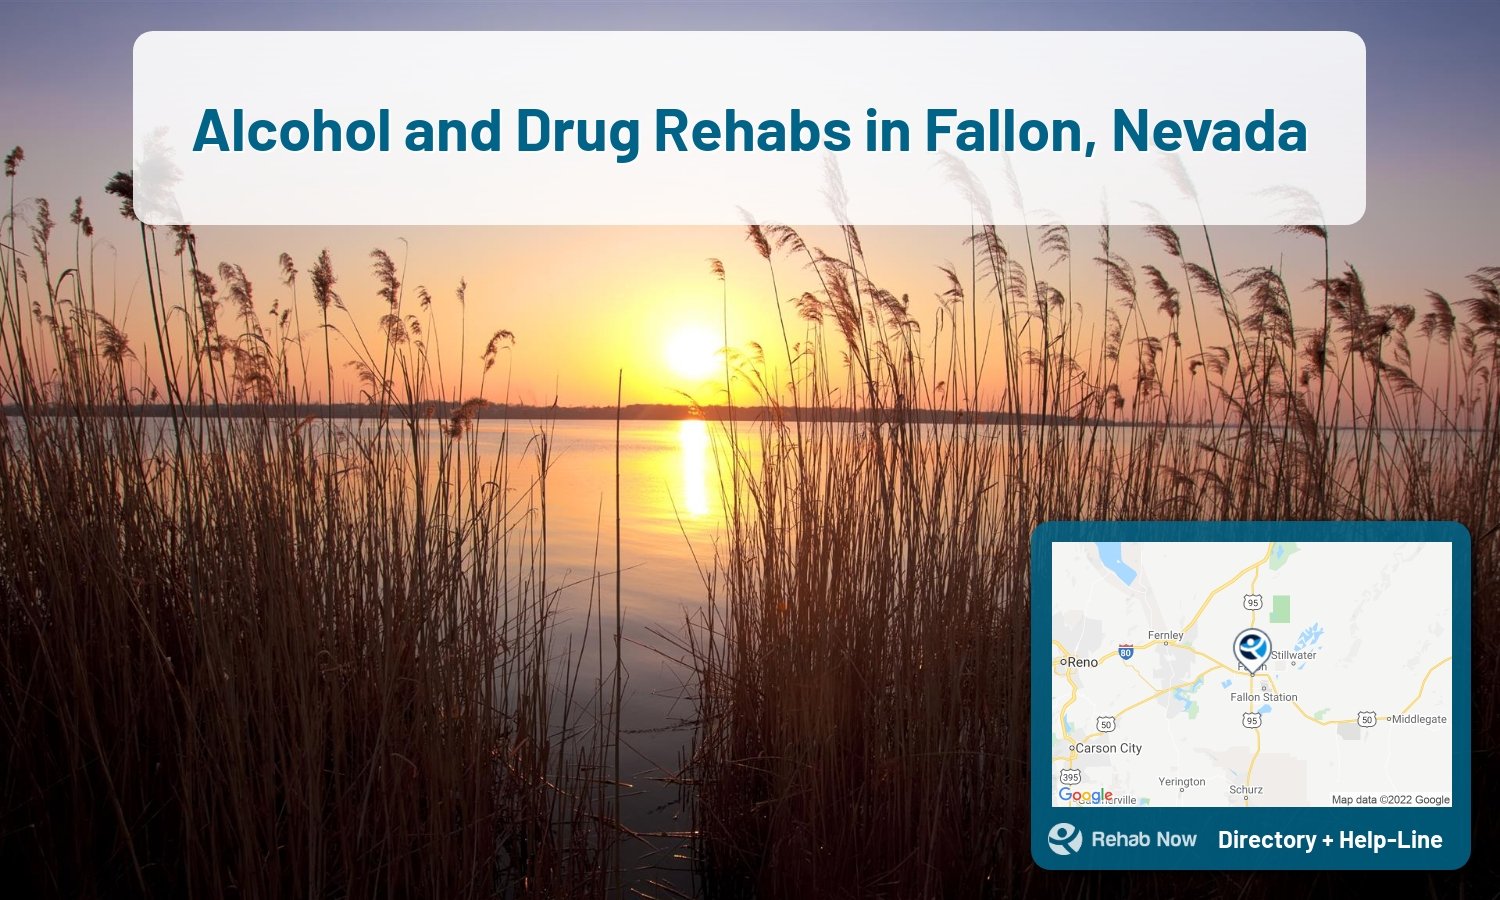 Those struggling with addiction can find help through addiction rehab facilities in Fallon, NV. Get help now!